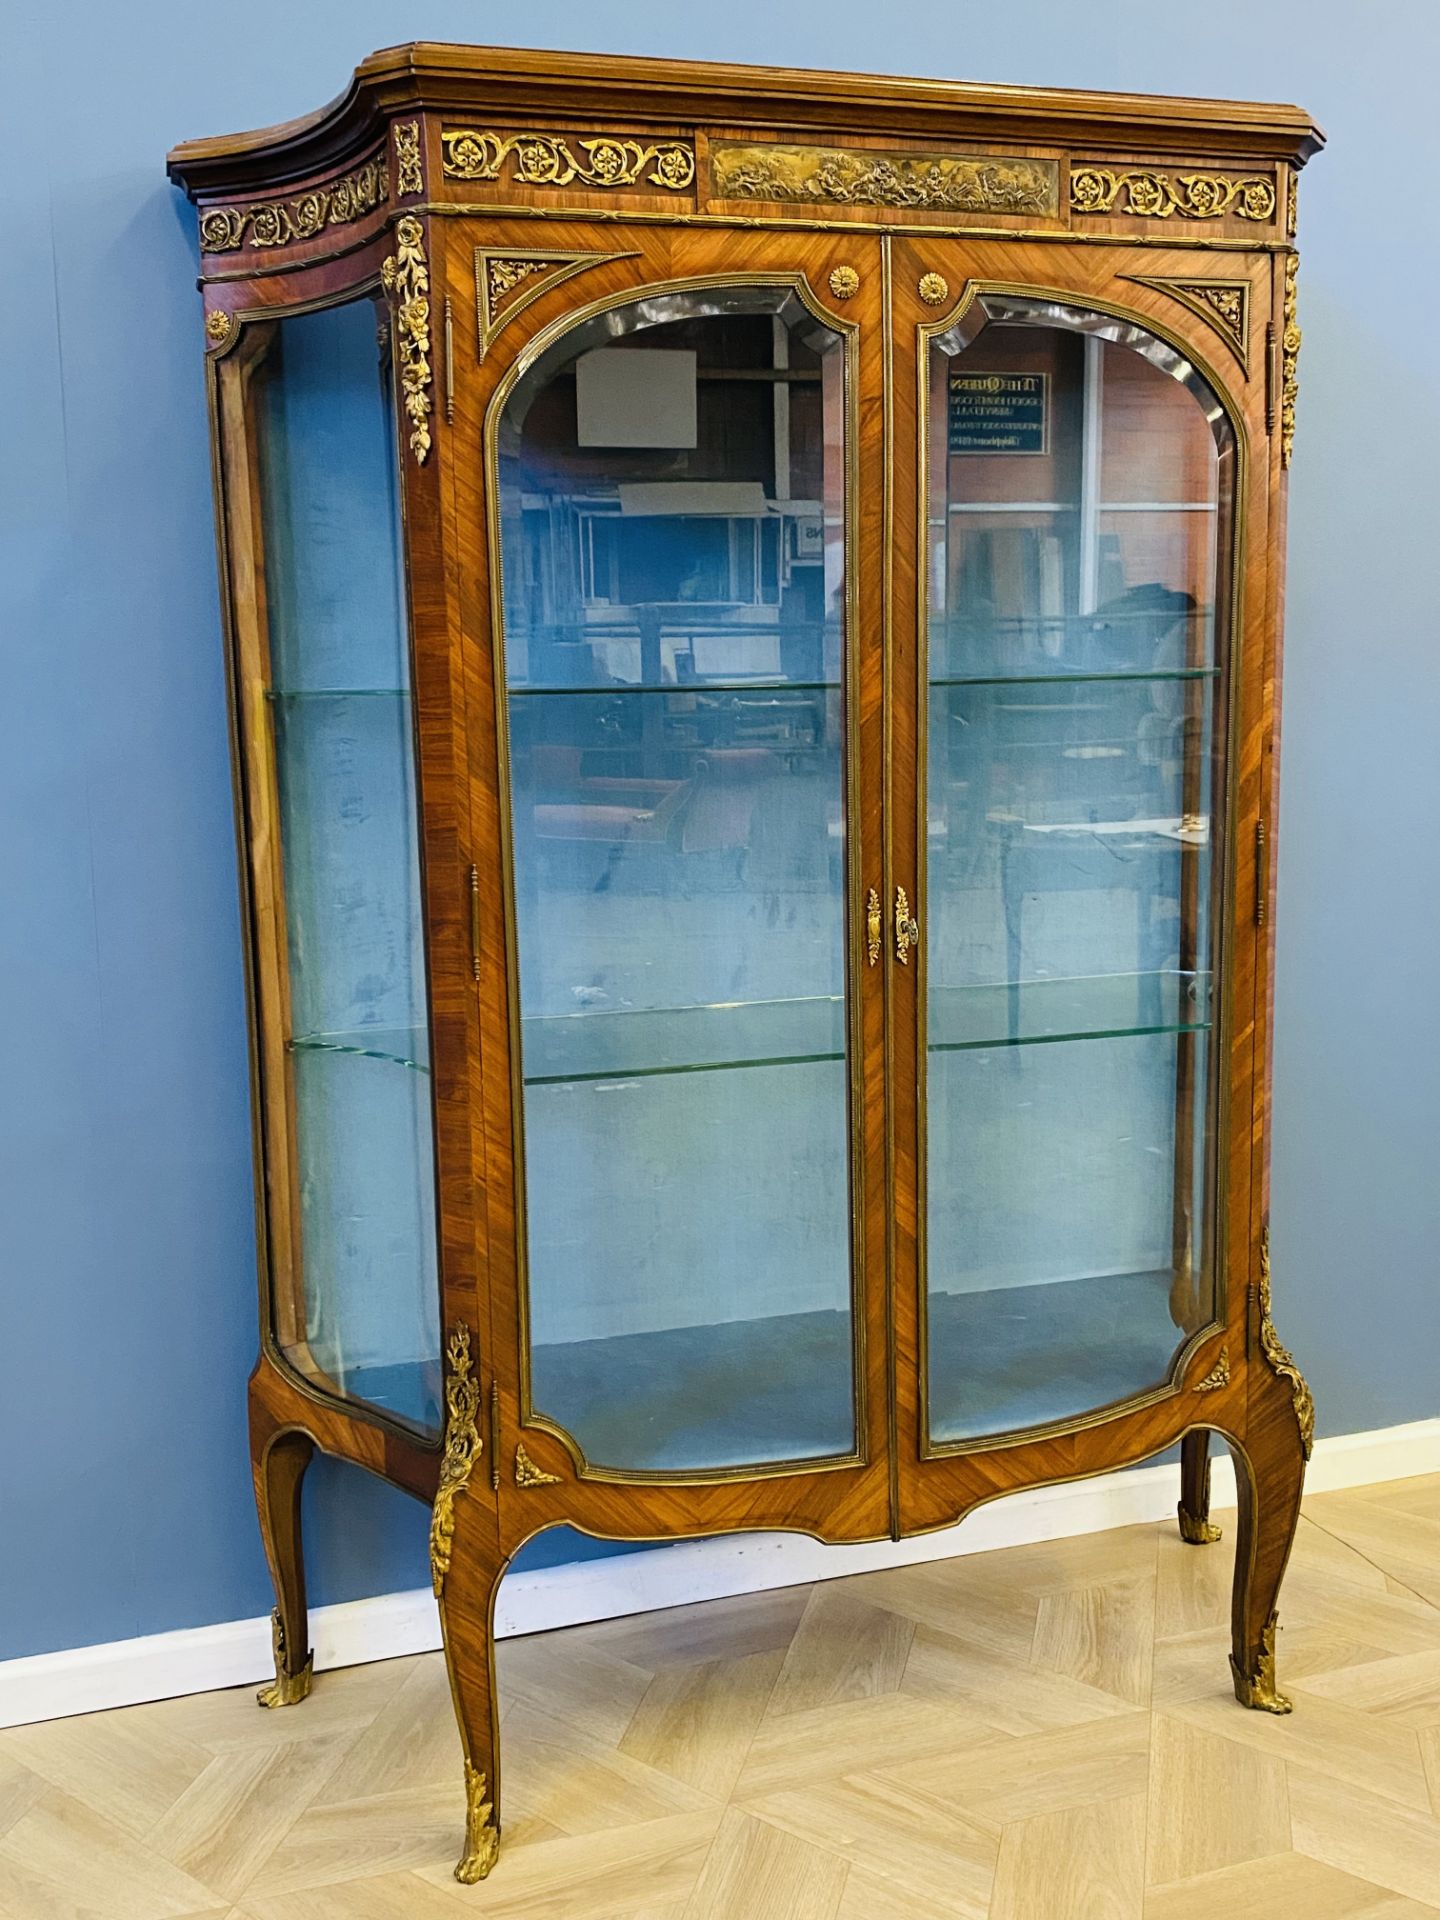 Late 19th century French kingwood and ormolu mounted two door vitrine - Image 4 of 7